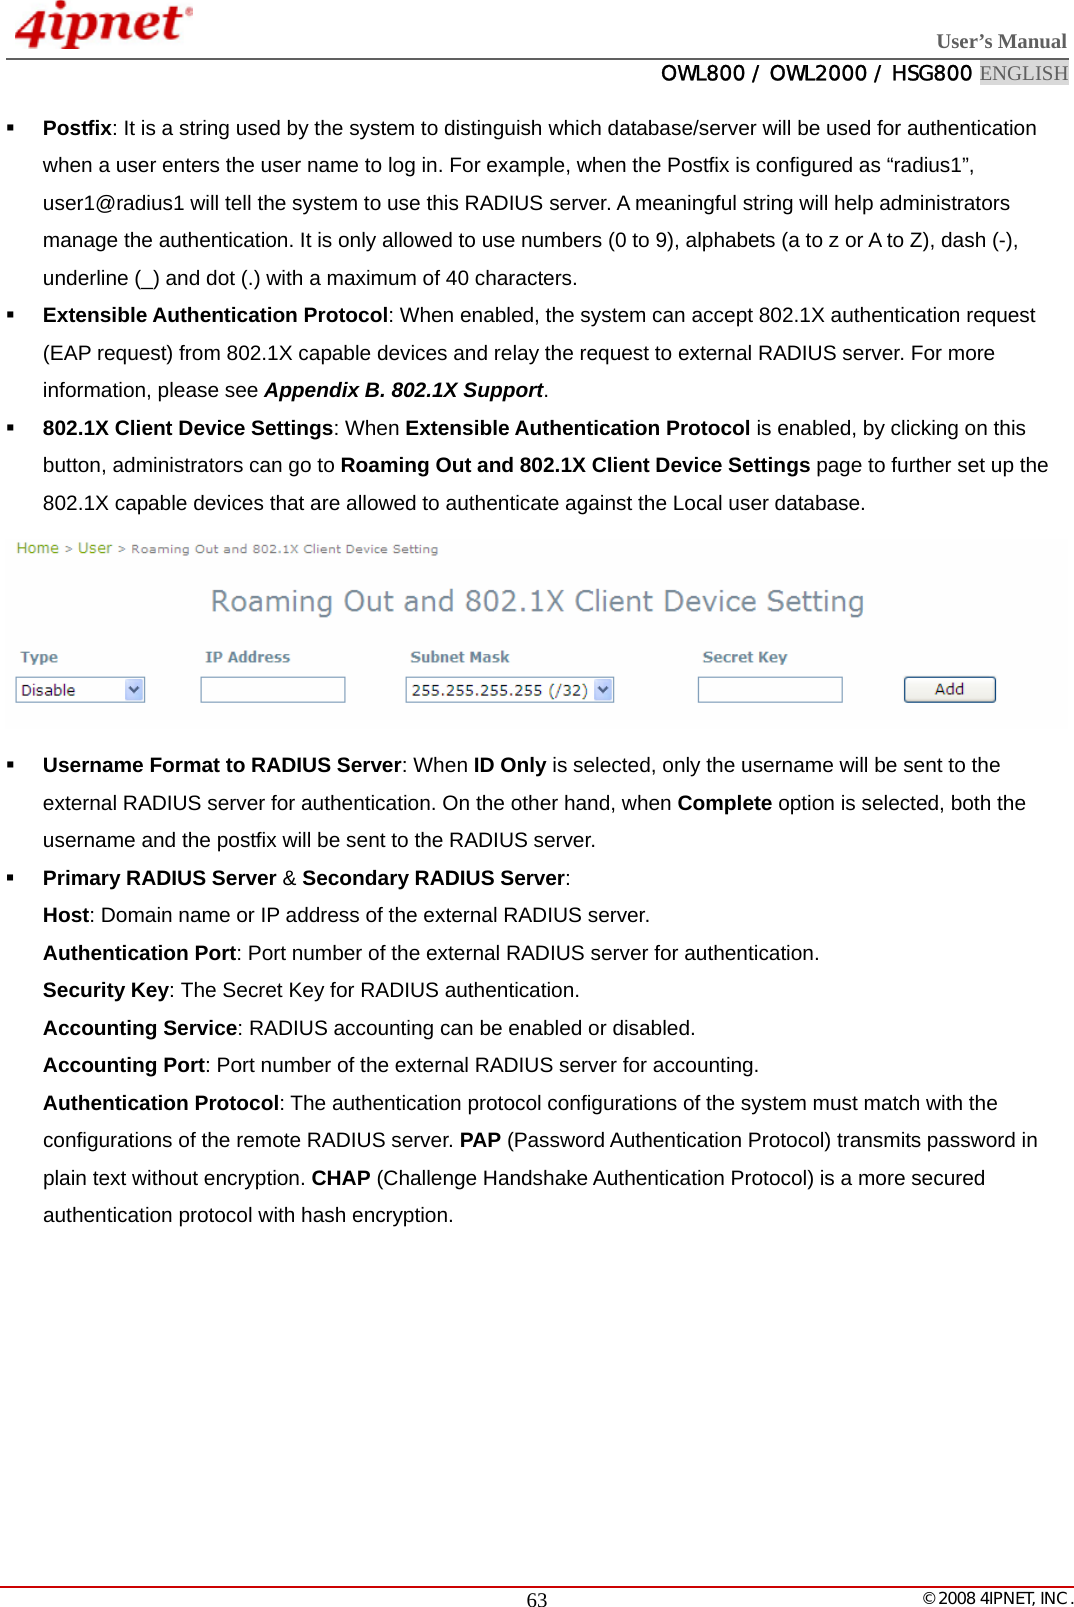  User’s Manual  OWL800 / OWL2000 / HSG800 ENGLISH   © 2008 4IPNET, INC.  63 Postfix: It is a string used by the system to distinguish which database/server will be used for authentication when a user enters the user name to log in. For example, when the Postfix is configured as “radius1”, user1@radius1 will tell the system to use this RADIUS server. A meaningful string will help administrators manage the authentication. It is only allowed to use numbers (0 to 9), alphabets (a to z or A to Z), dash (-), underline (_) and dot (.) with a maximum of 40 characters.  Extensible Authentication Protocol: When enabled, the system can accept 802.1X authentication request (EAP request) from 802.1X capable devices and relay the request to external RADIUS server. For more information, please see Appendix B. 802.1X Support.  802.1X Client Device Settings: When Extensible Authentication Protocol is enabled, by clicking on this button, administrators can go to Roaming Out and 802.1X Client Device Settings page to further set up the 802.1X capable devices that are allowed to authenticate against the Local user database.   Username Format to RADIUS Server: When ID Only is selected, only the username will be sent to the external RADIUS server for authentication. On the other hand, when Complete option is selected, both the username and the postfix will be sent to the RADIUS server.  Primary RADIUS Server &amp; Secondary RADIUS Server: Host: Domain name or IP address of the external RADIUS server. Authentication Port: Port number of the external RADIUS server for authentication. Security Key: The Secret Key for RADIUS authentication. Accounting Service: RADIUS accounting can be enabled or disabled. Accounting Port: Port number of the external RADIUS server for accounting. Authentication Protocol: The authentication protocol configurations of the system must match with the configurations of the remote RADIUS server. PAP (Password Authentication Protocol) transmits password in plain text without encryption. CHAP (Challenge Handshake Authentication Protocol) is a more secured authentication protocol with hash encryption.         